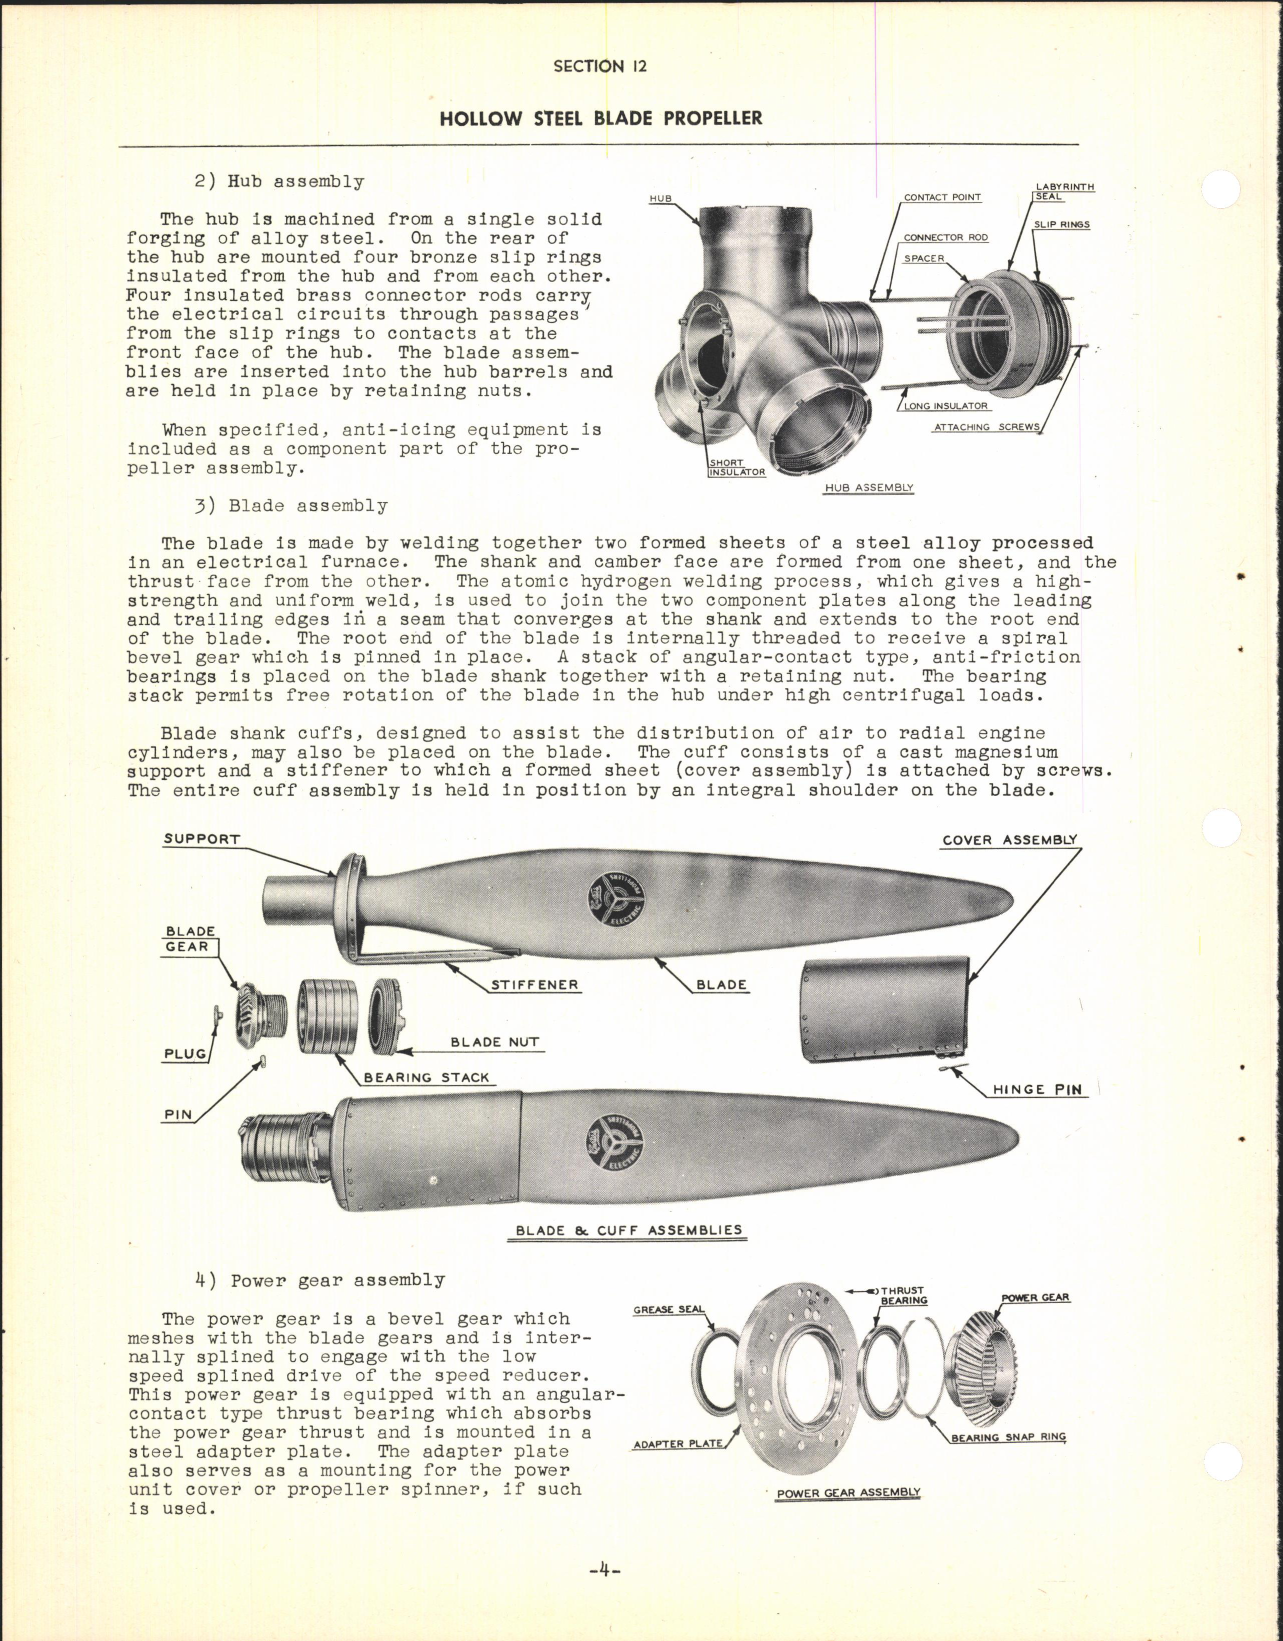 Sample page 6 from AirCorps Library document: Section 12 - Hollow Steel Blade Propeller (Three Blade)